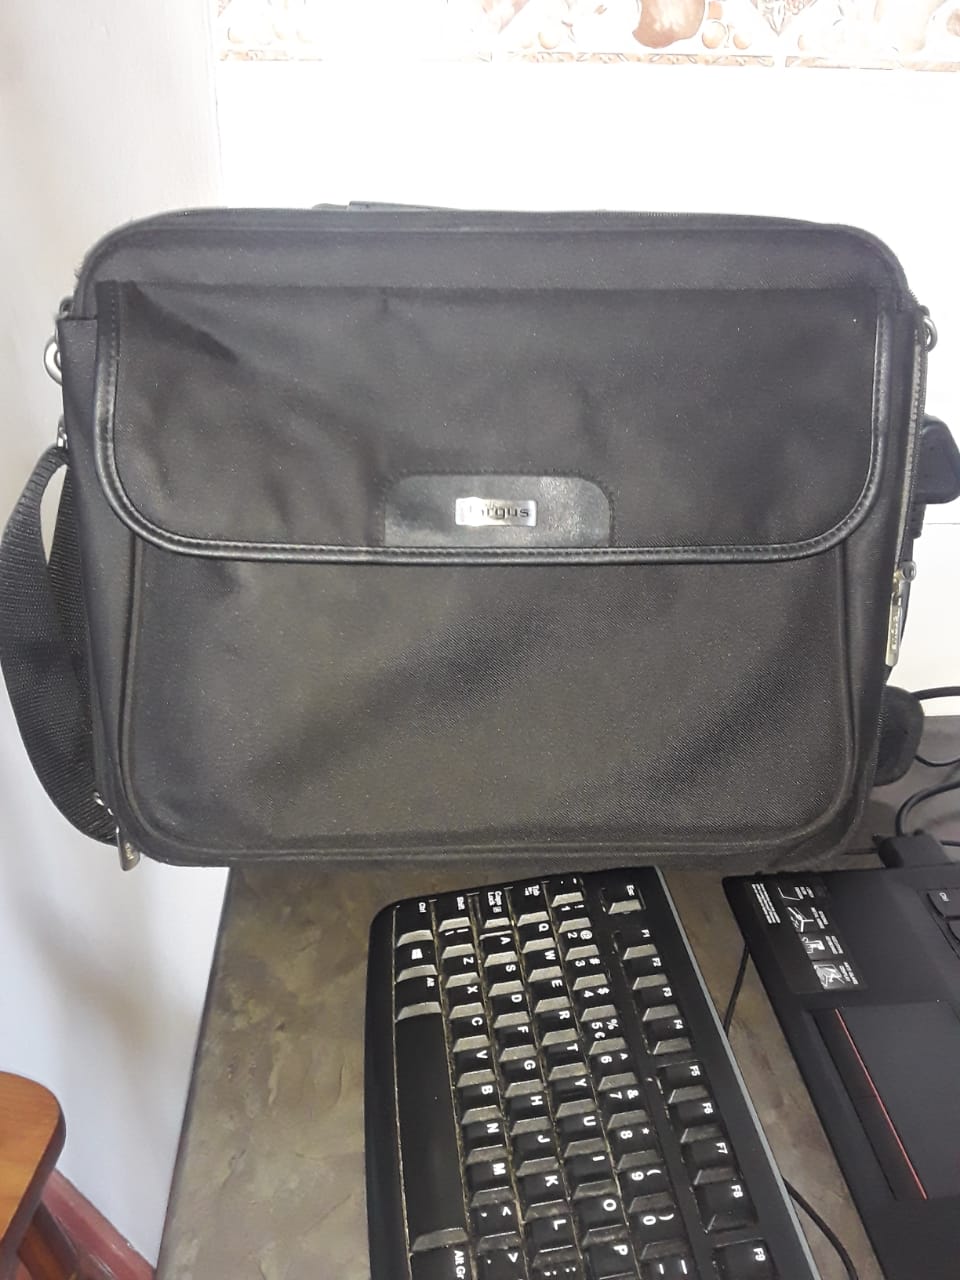 Lenovo laptop with accessories